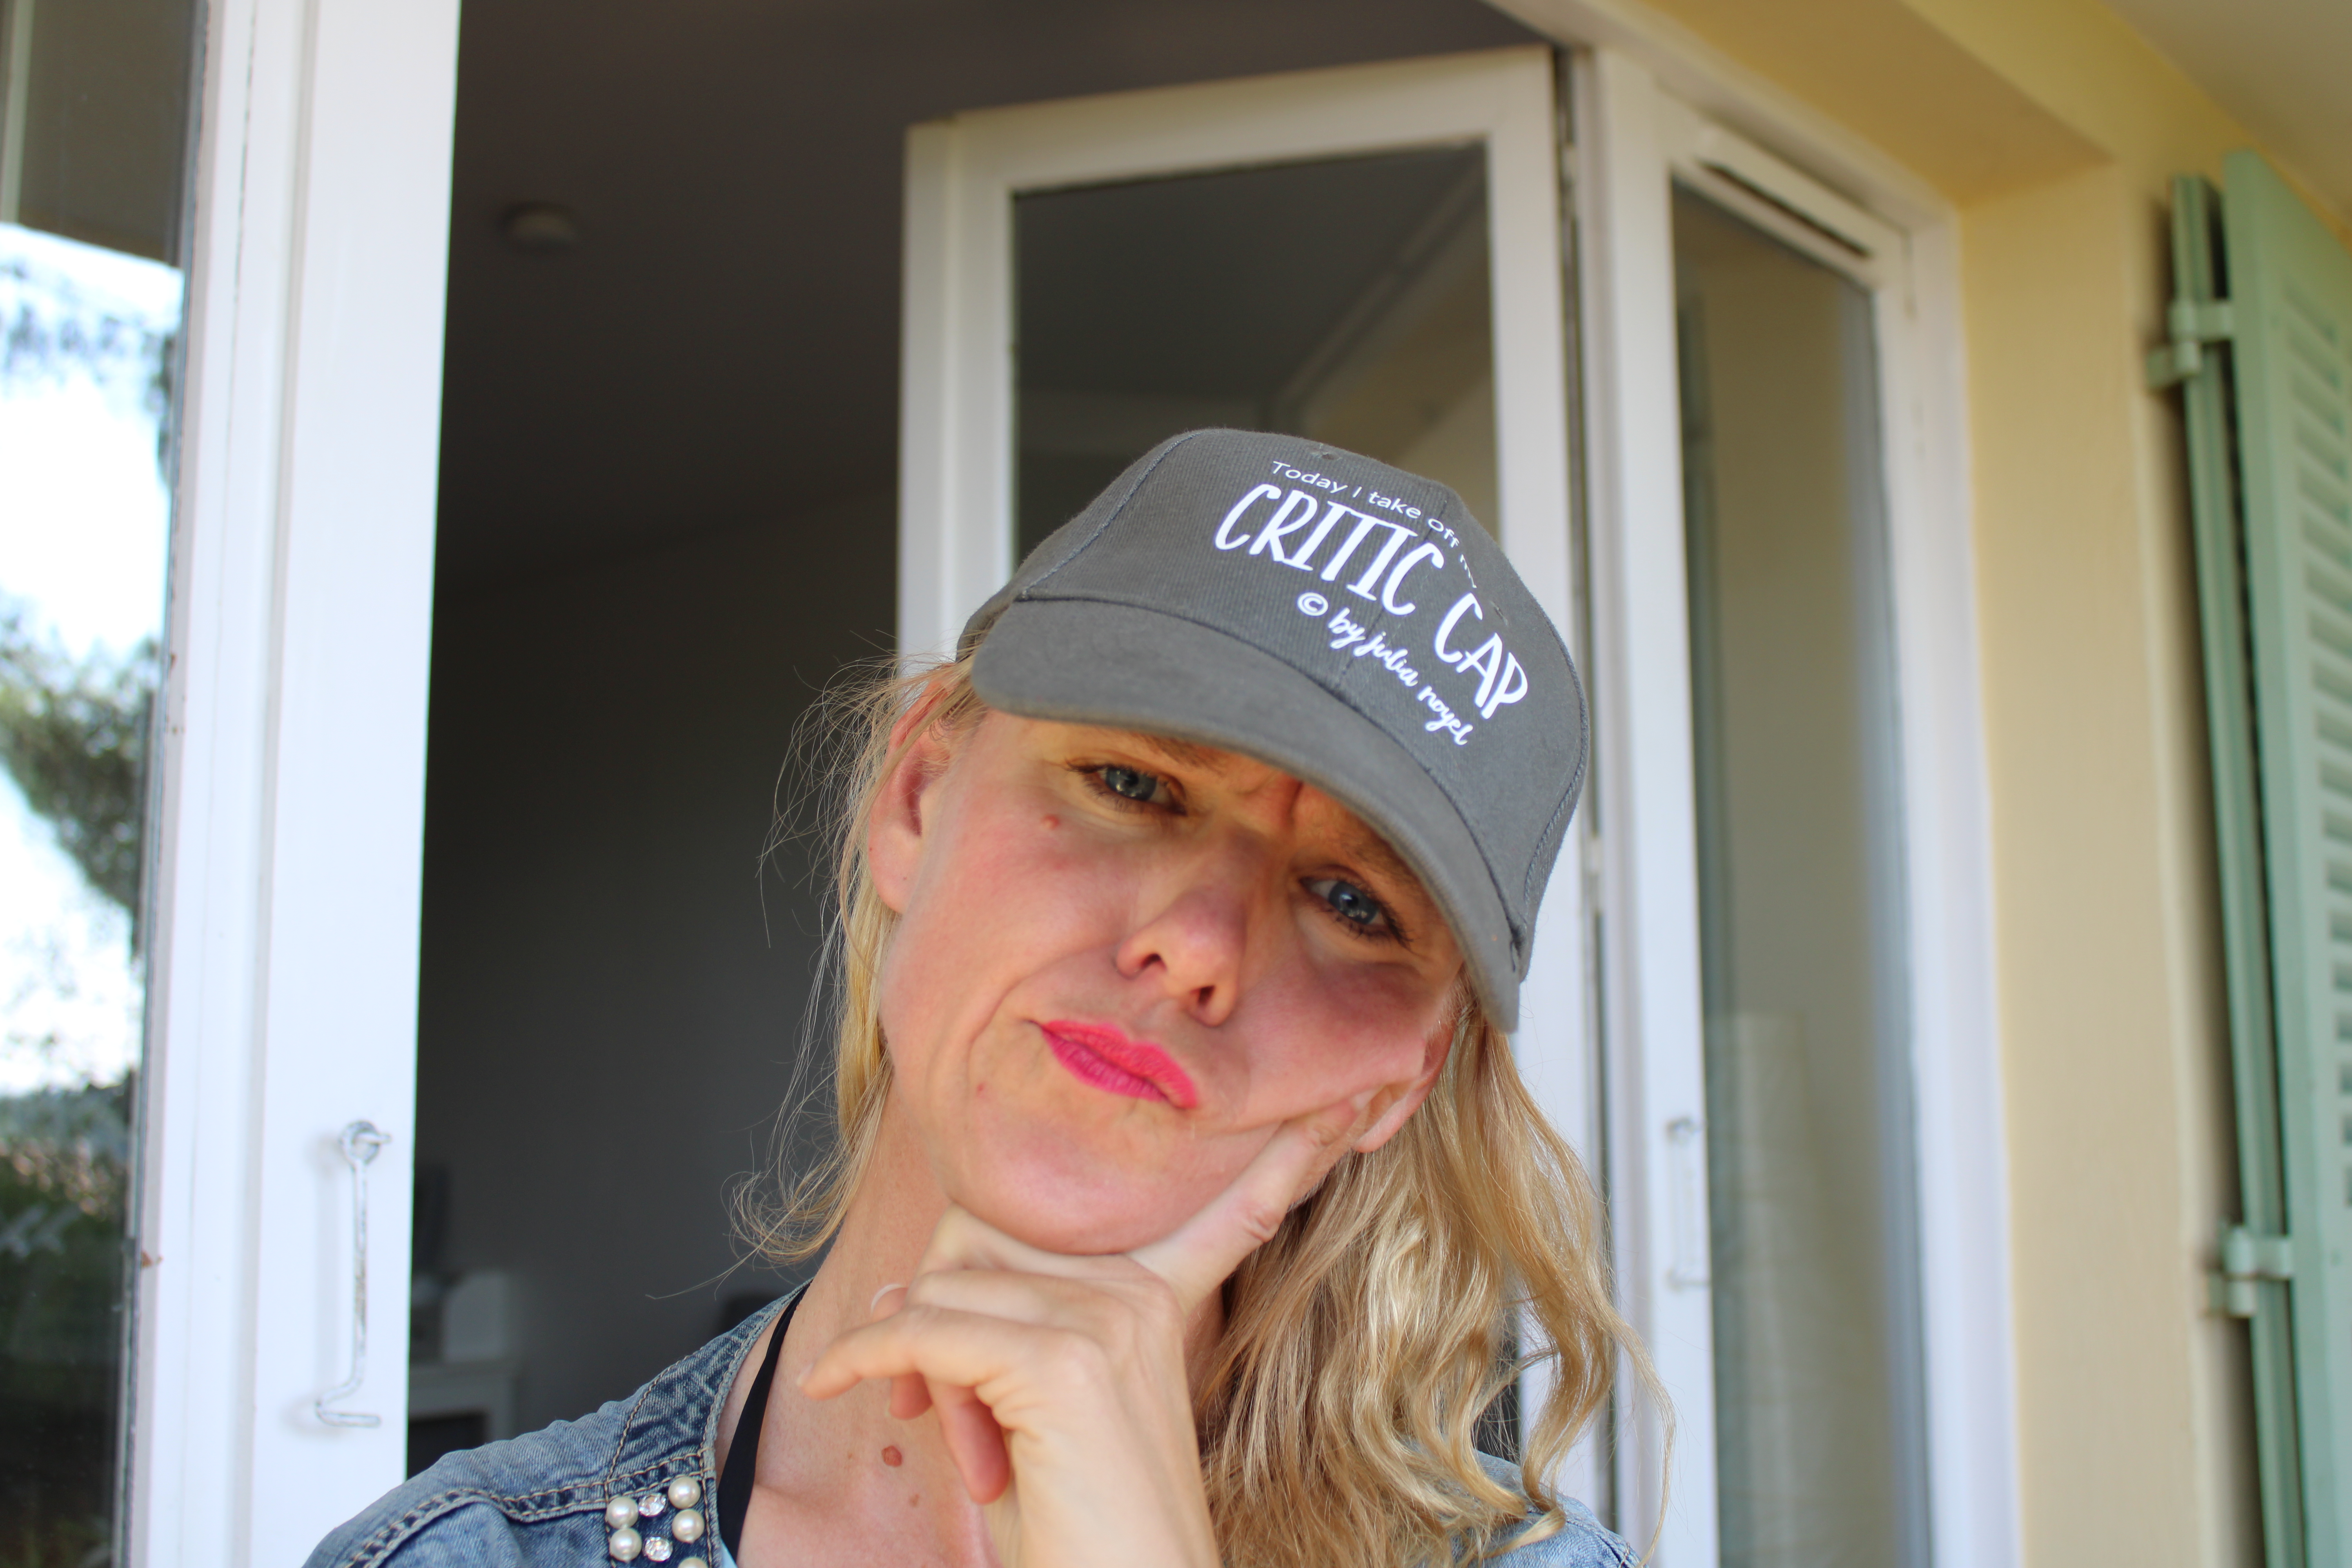 Today I am taking off my critic cap by Julia Noyel